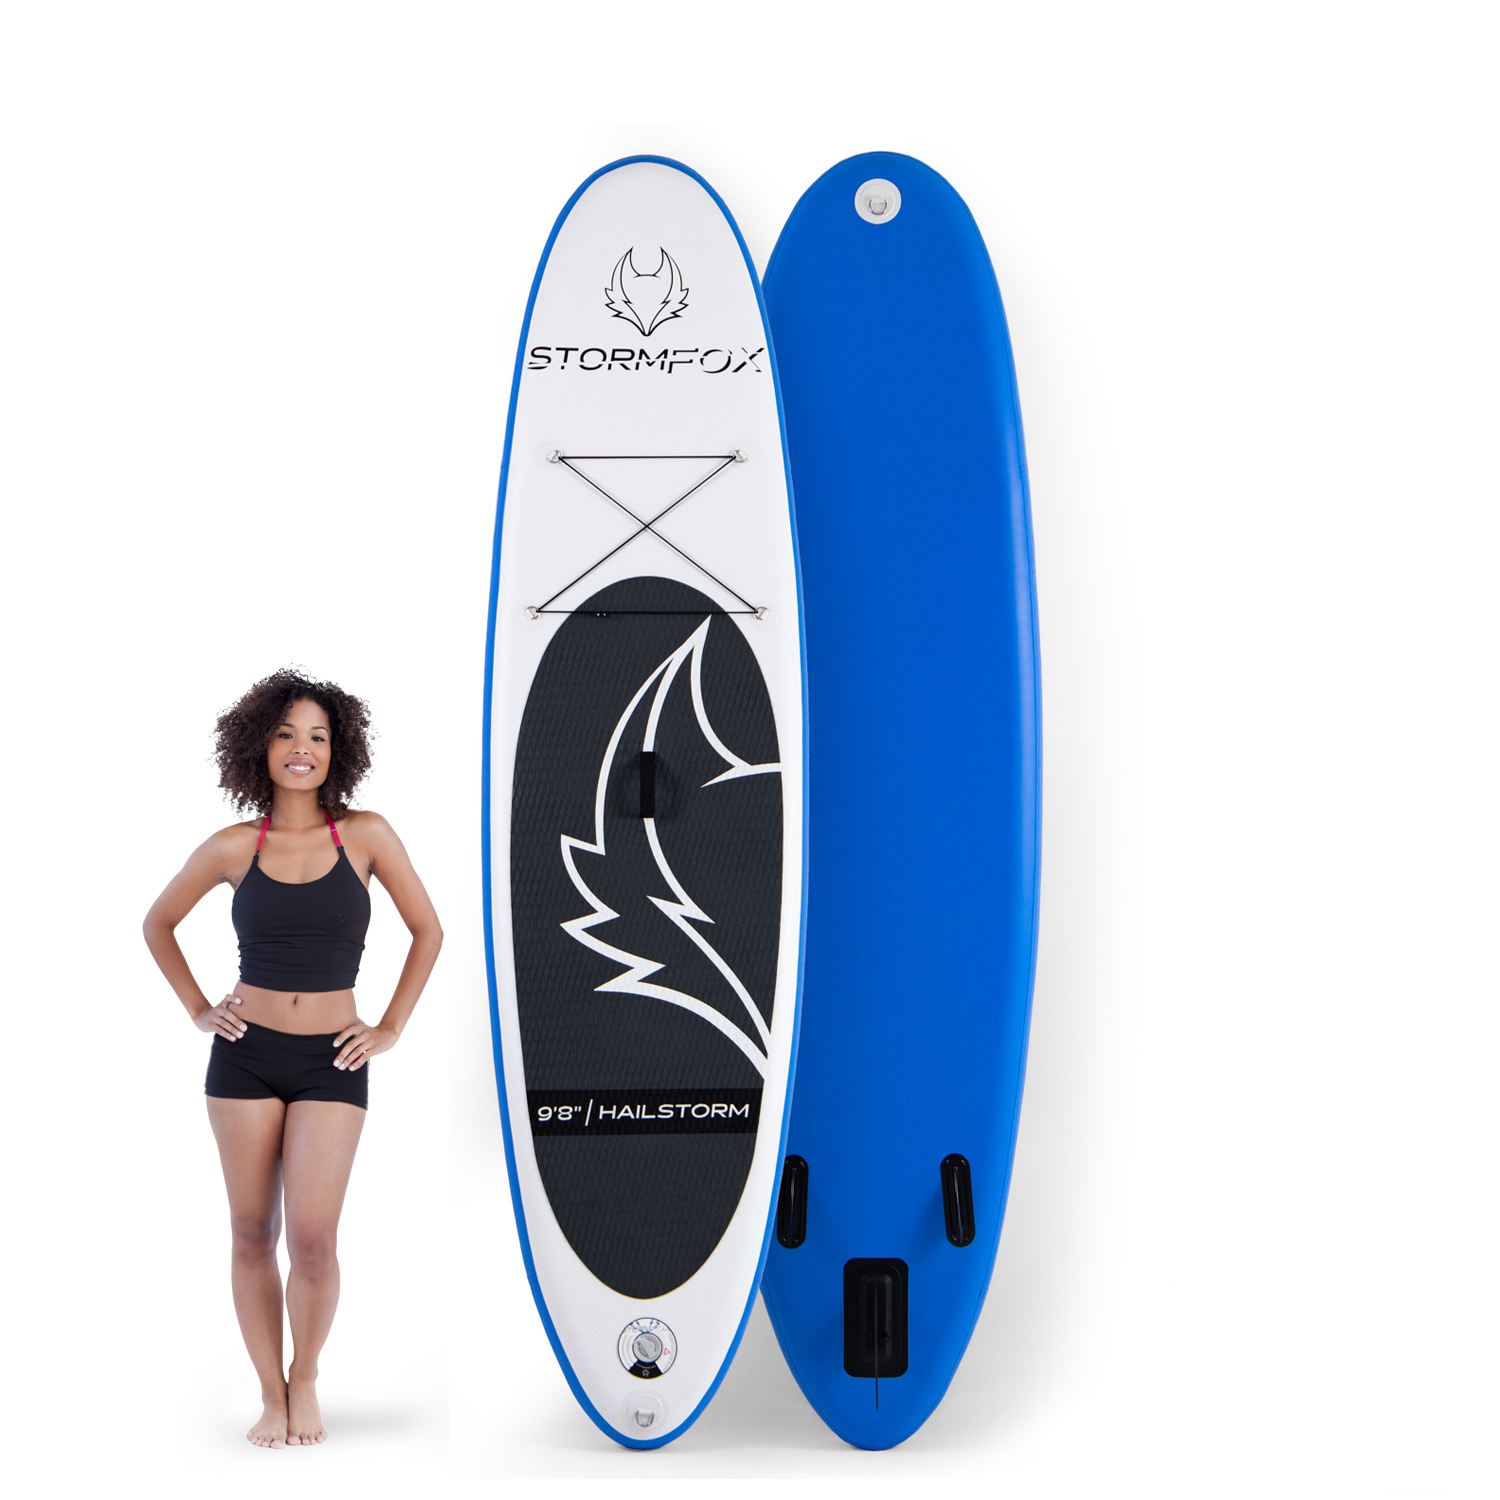 Hailstorm Stand Up Paddle Board Kit - 9'8